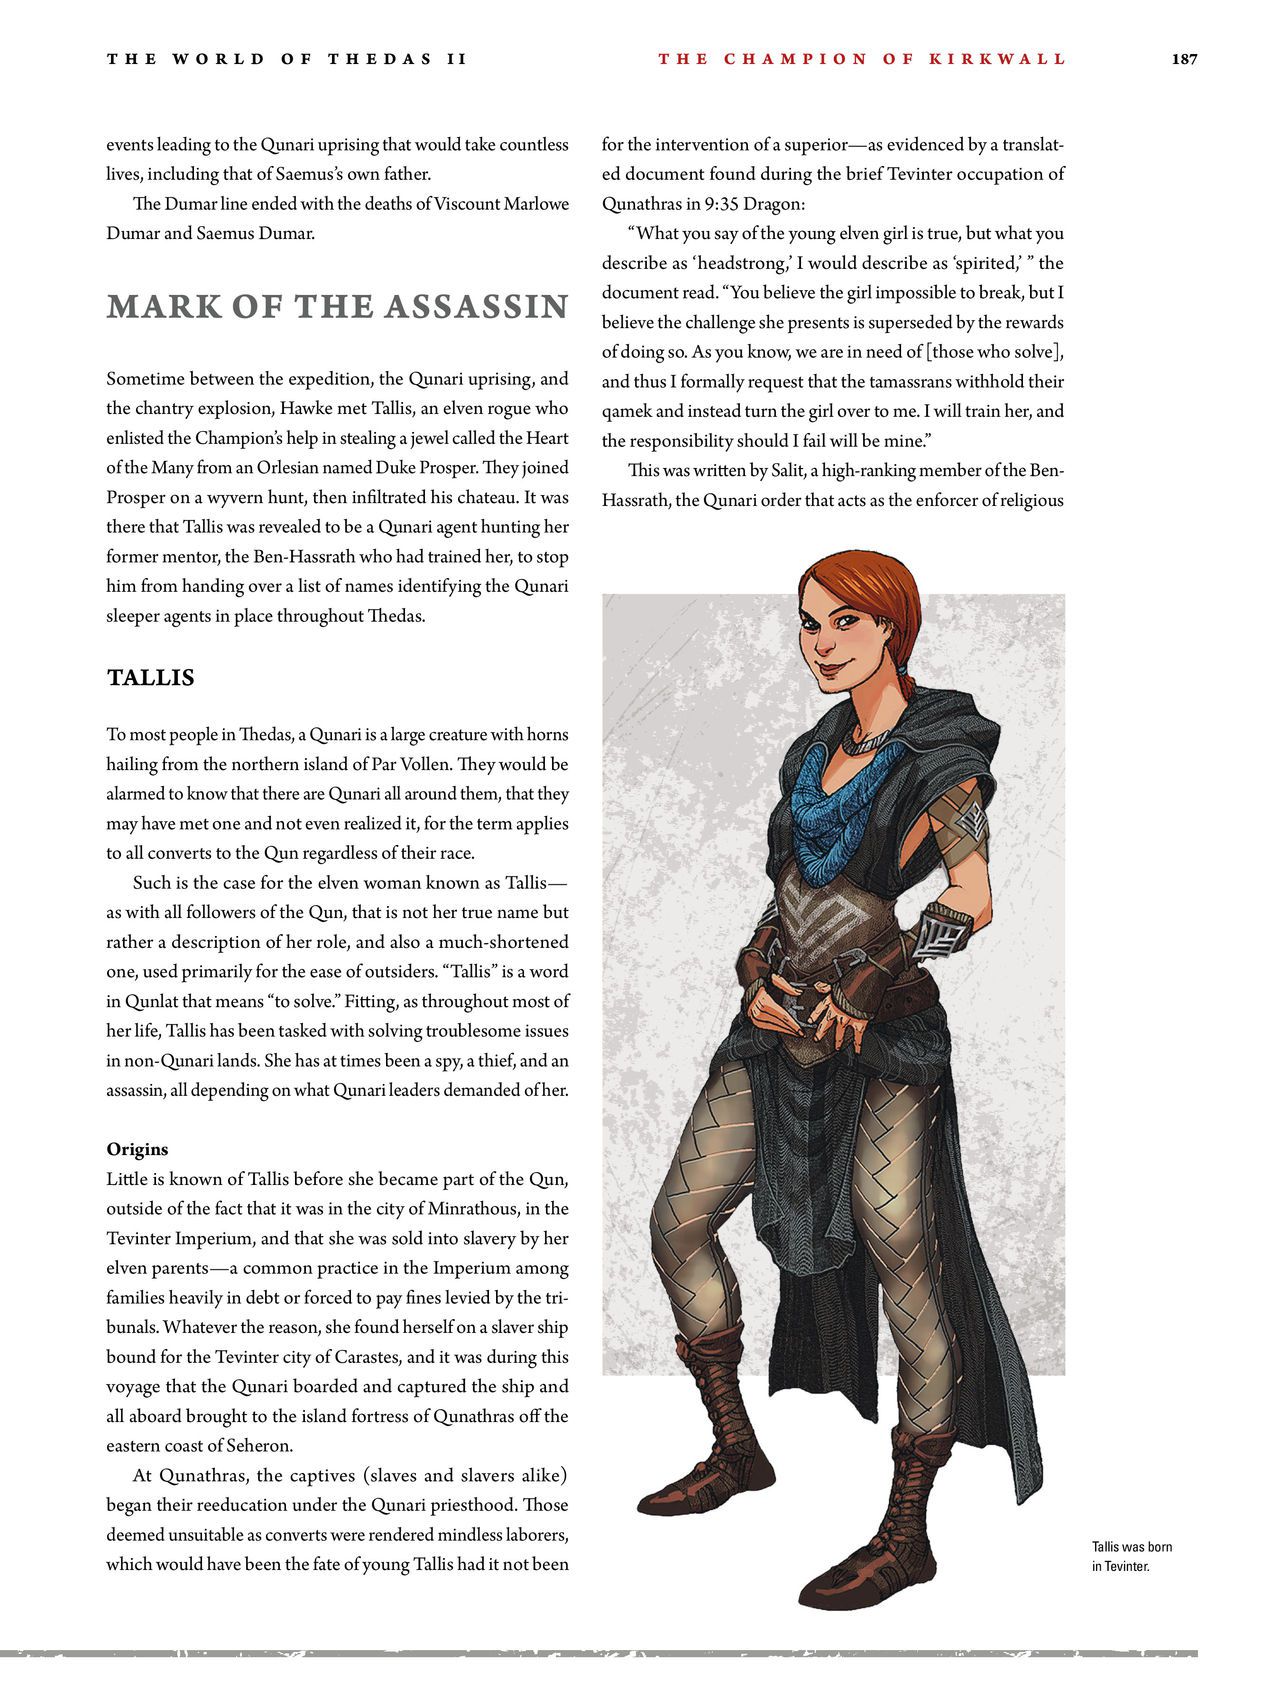 Dragon Age - The World of Thedas v02 182